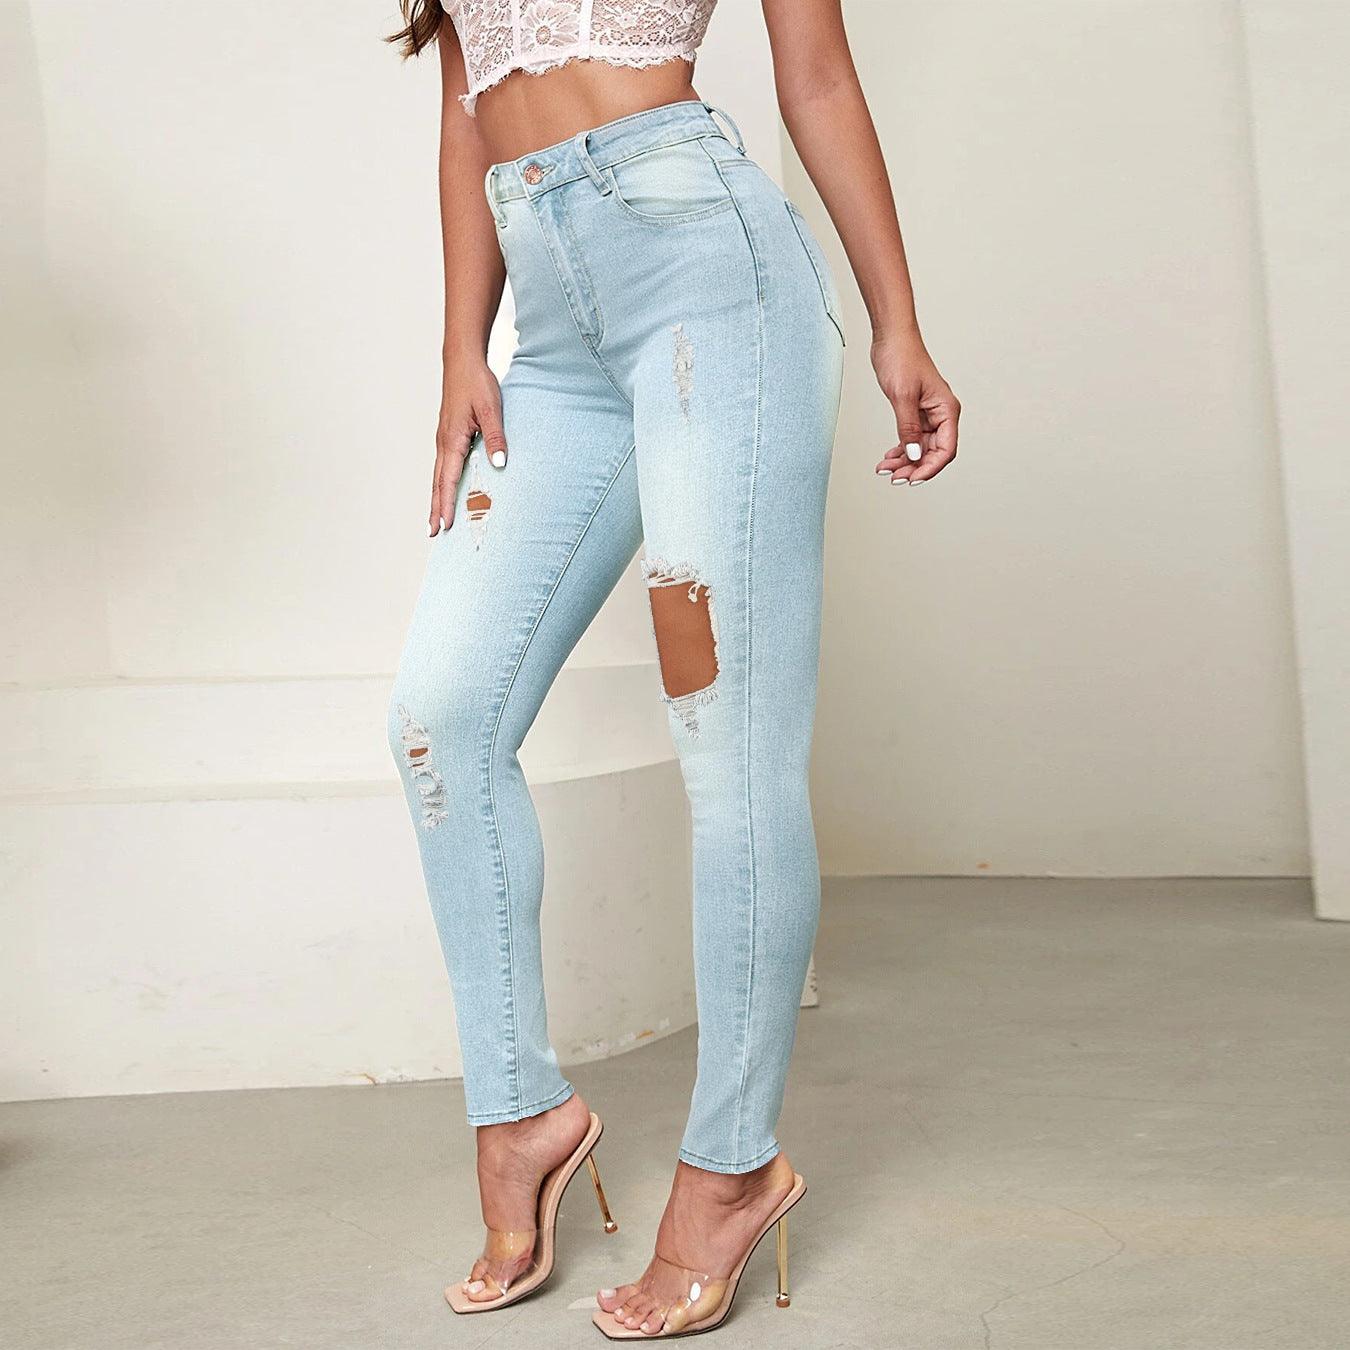 Women's Stylish High-Rise Ripped Pencil Jeans - ForVanity jeans, women's clothing Jeans